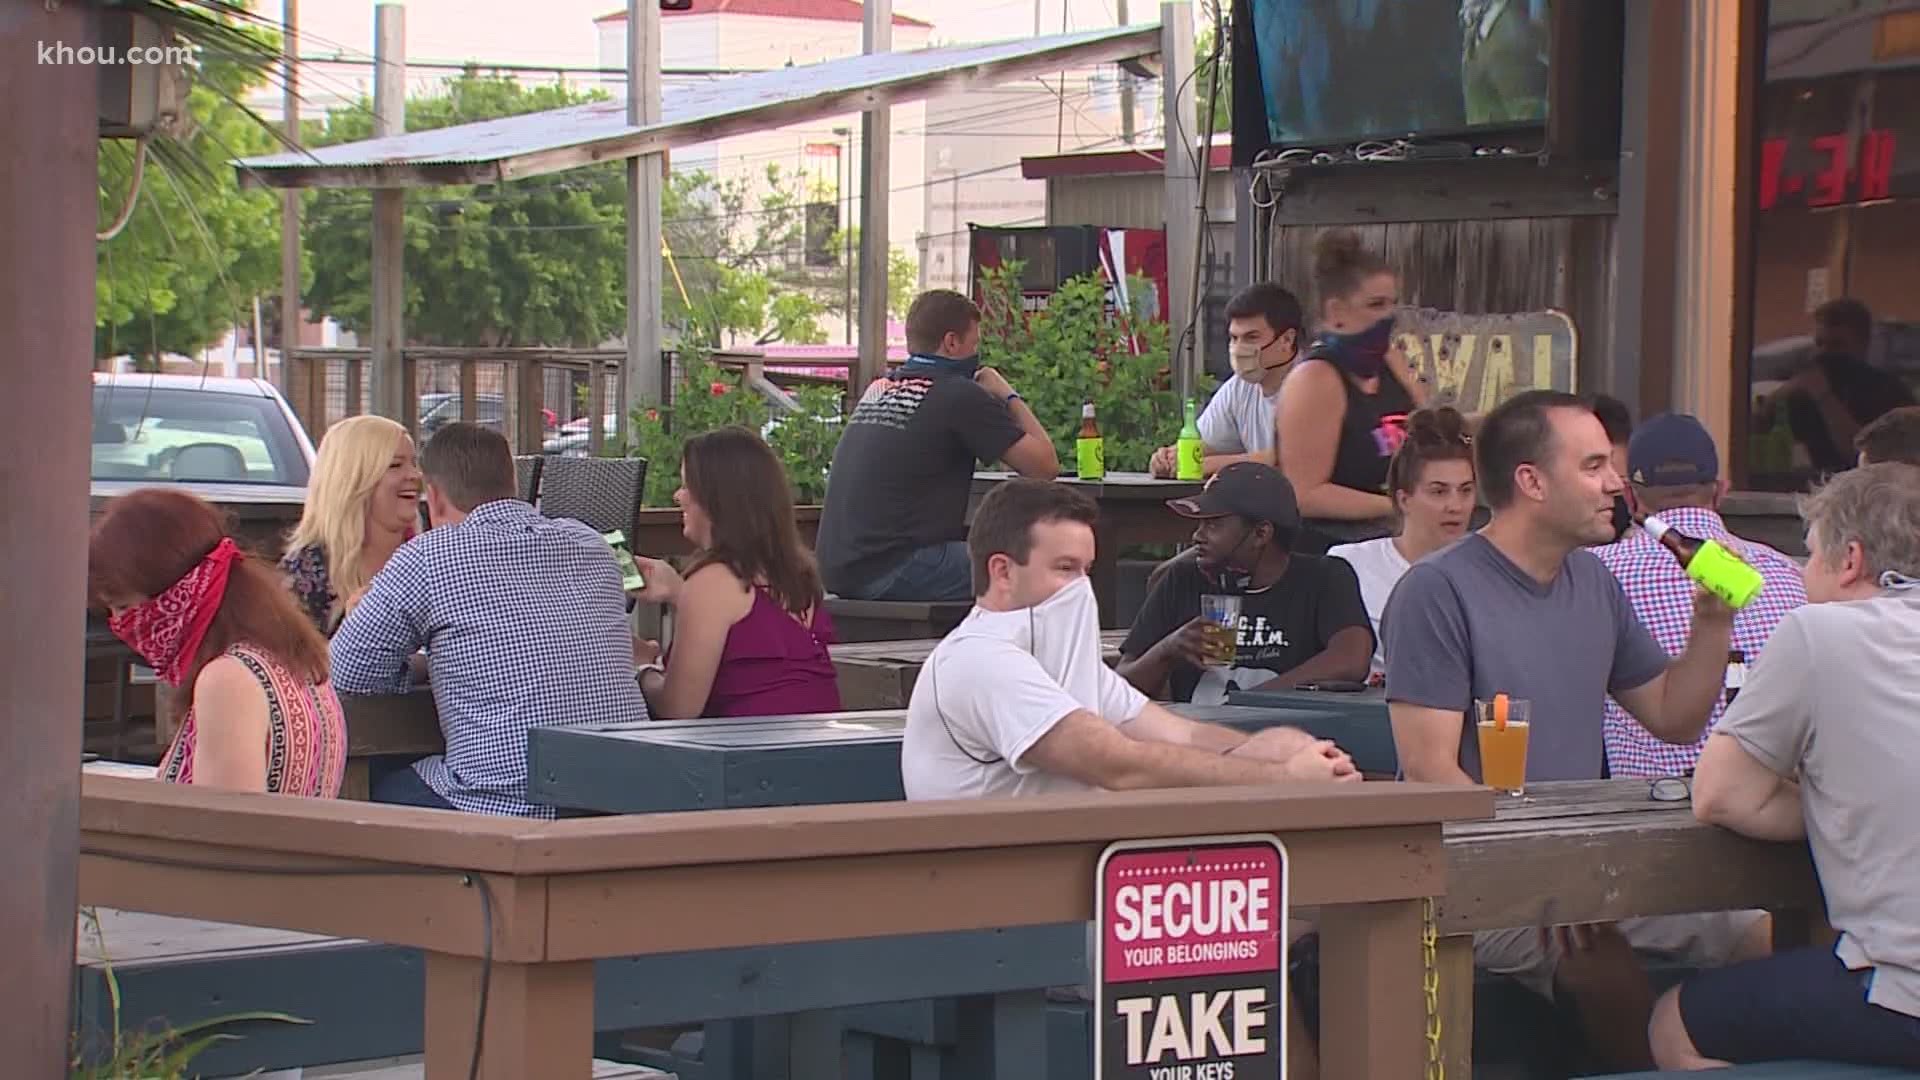 Bars began pouring drinks on Friday under Governor Greg Abbott’s Phase 2 of reopening Texas.